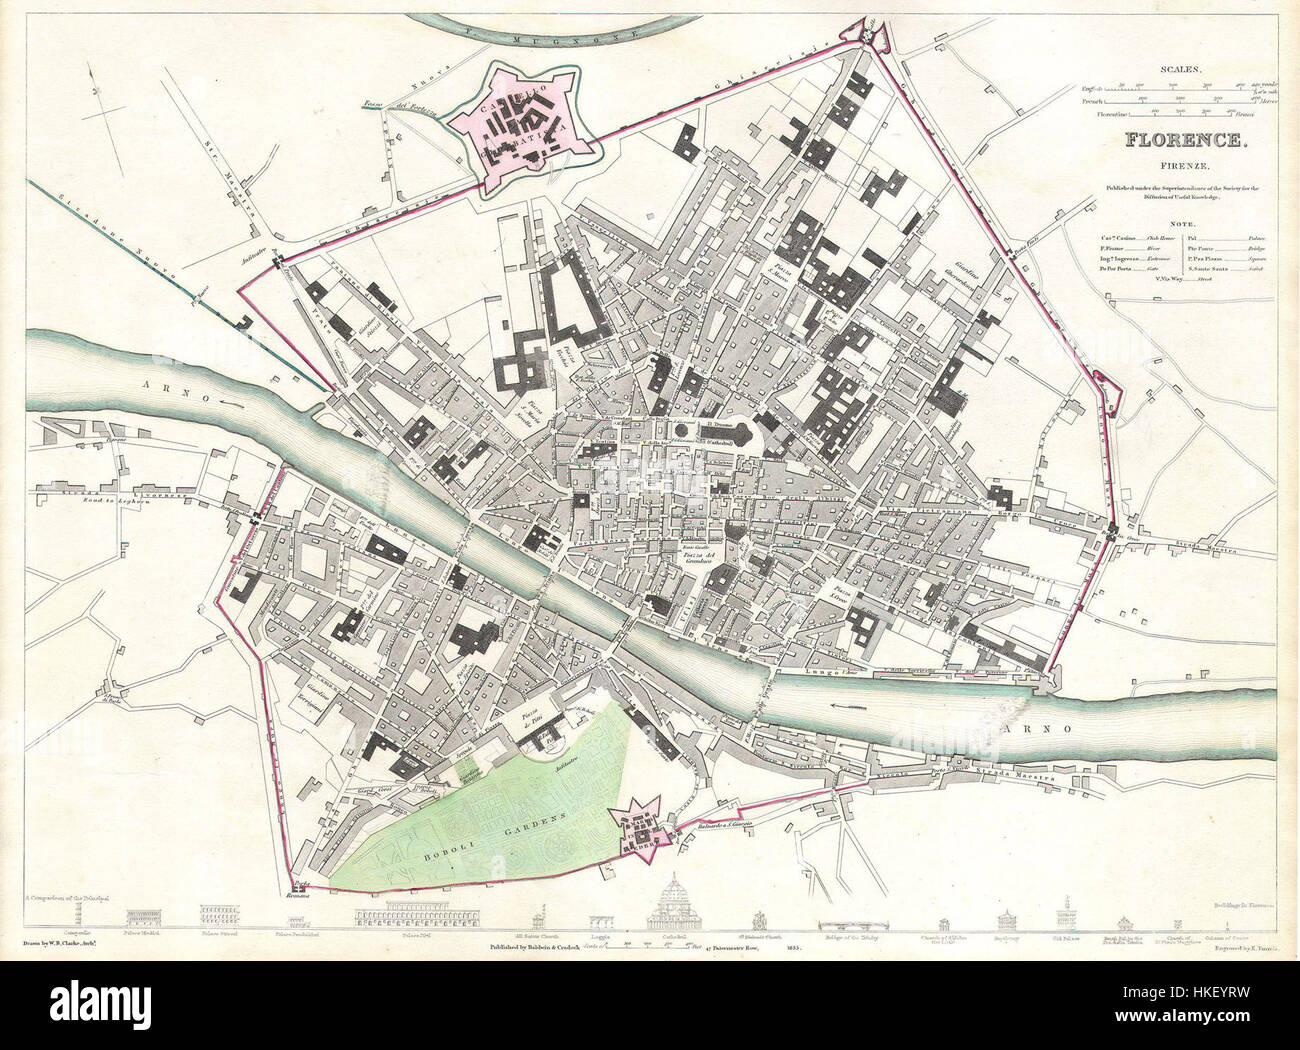 1835 S.D.U.K. City Map or Plan of Florence or Firenze, Italy   Geographicus   Florence SDUK 1835 Stock Photo